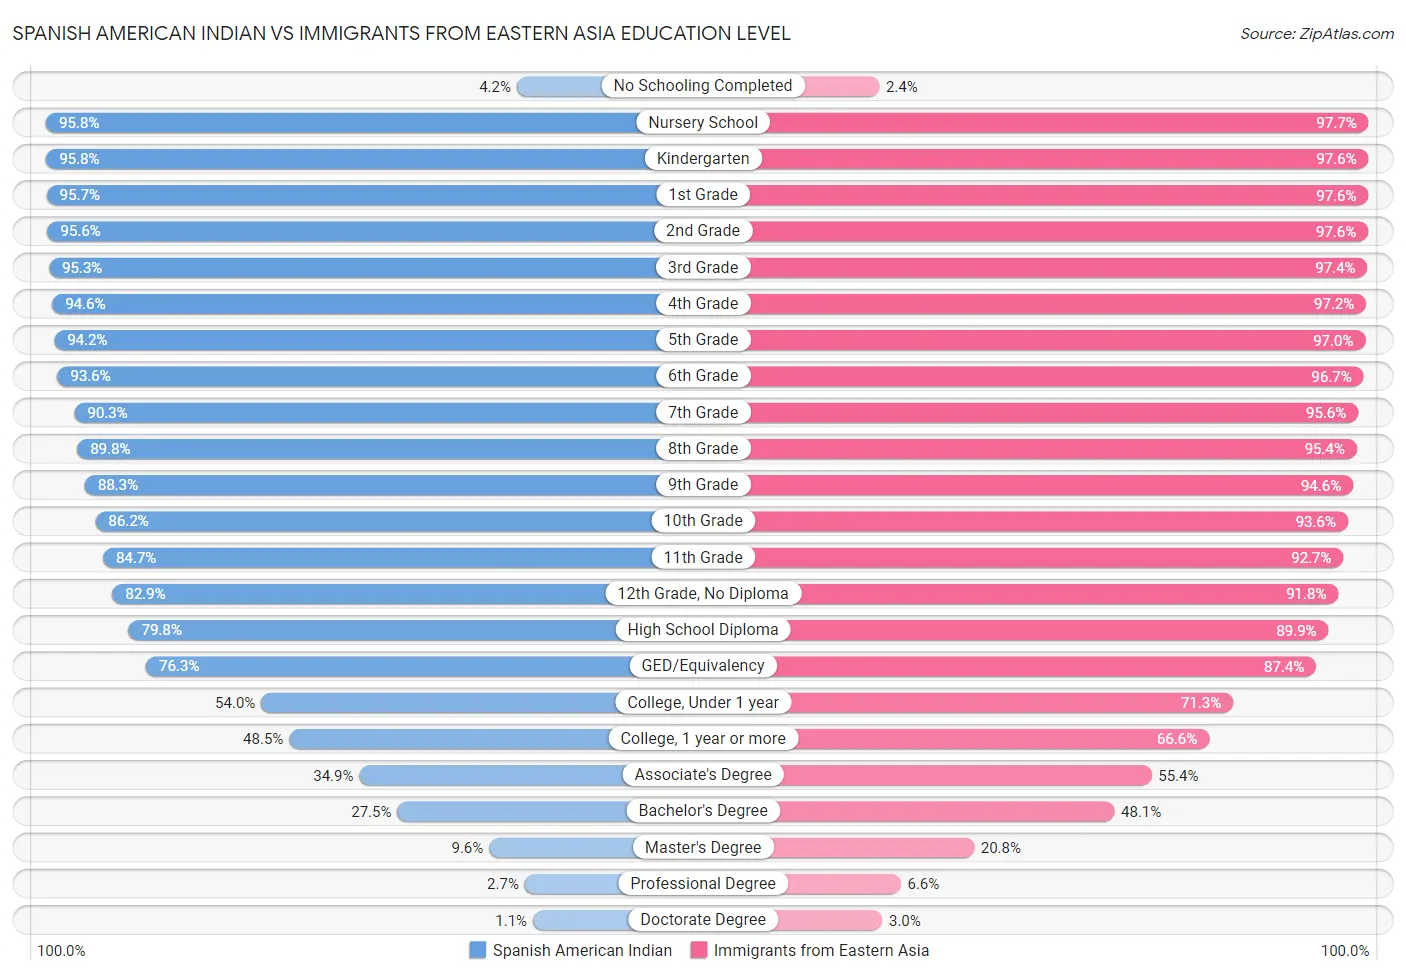 Spanish American Indian vs Immigrants from Eastern Asia Education Level